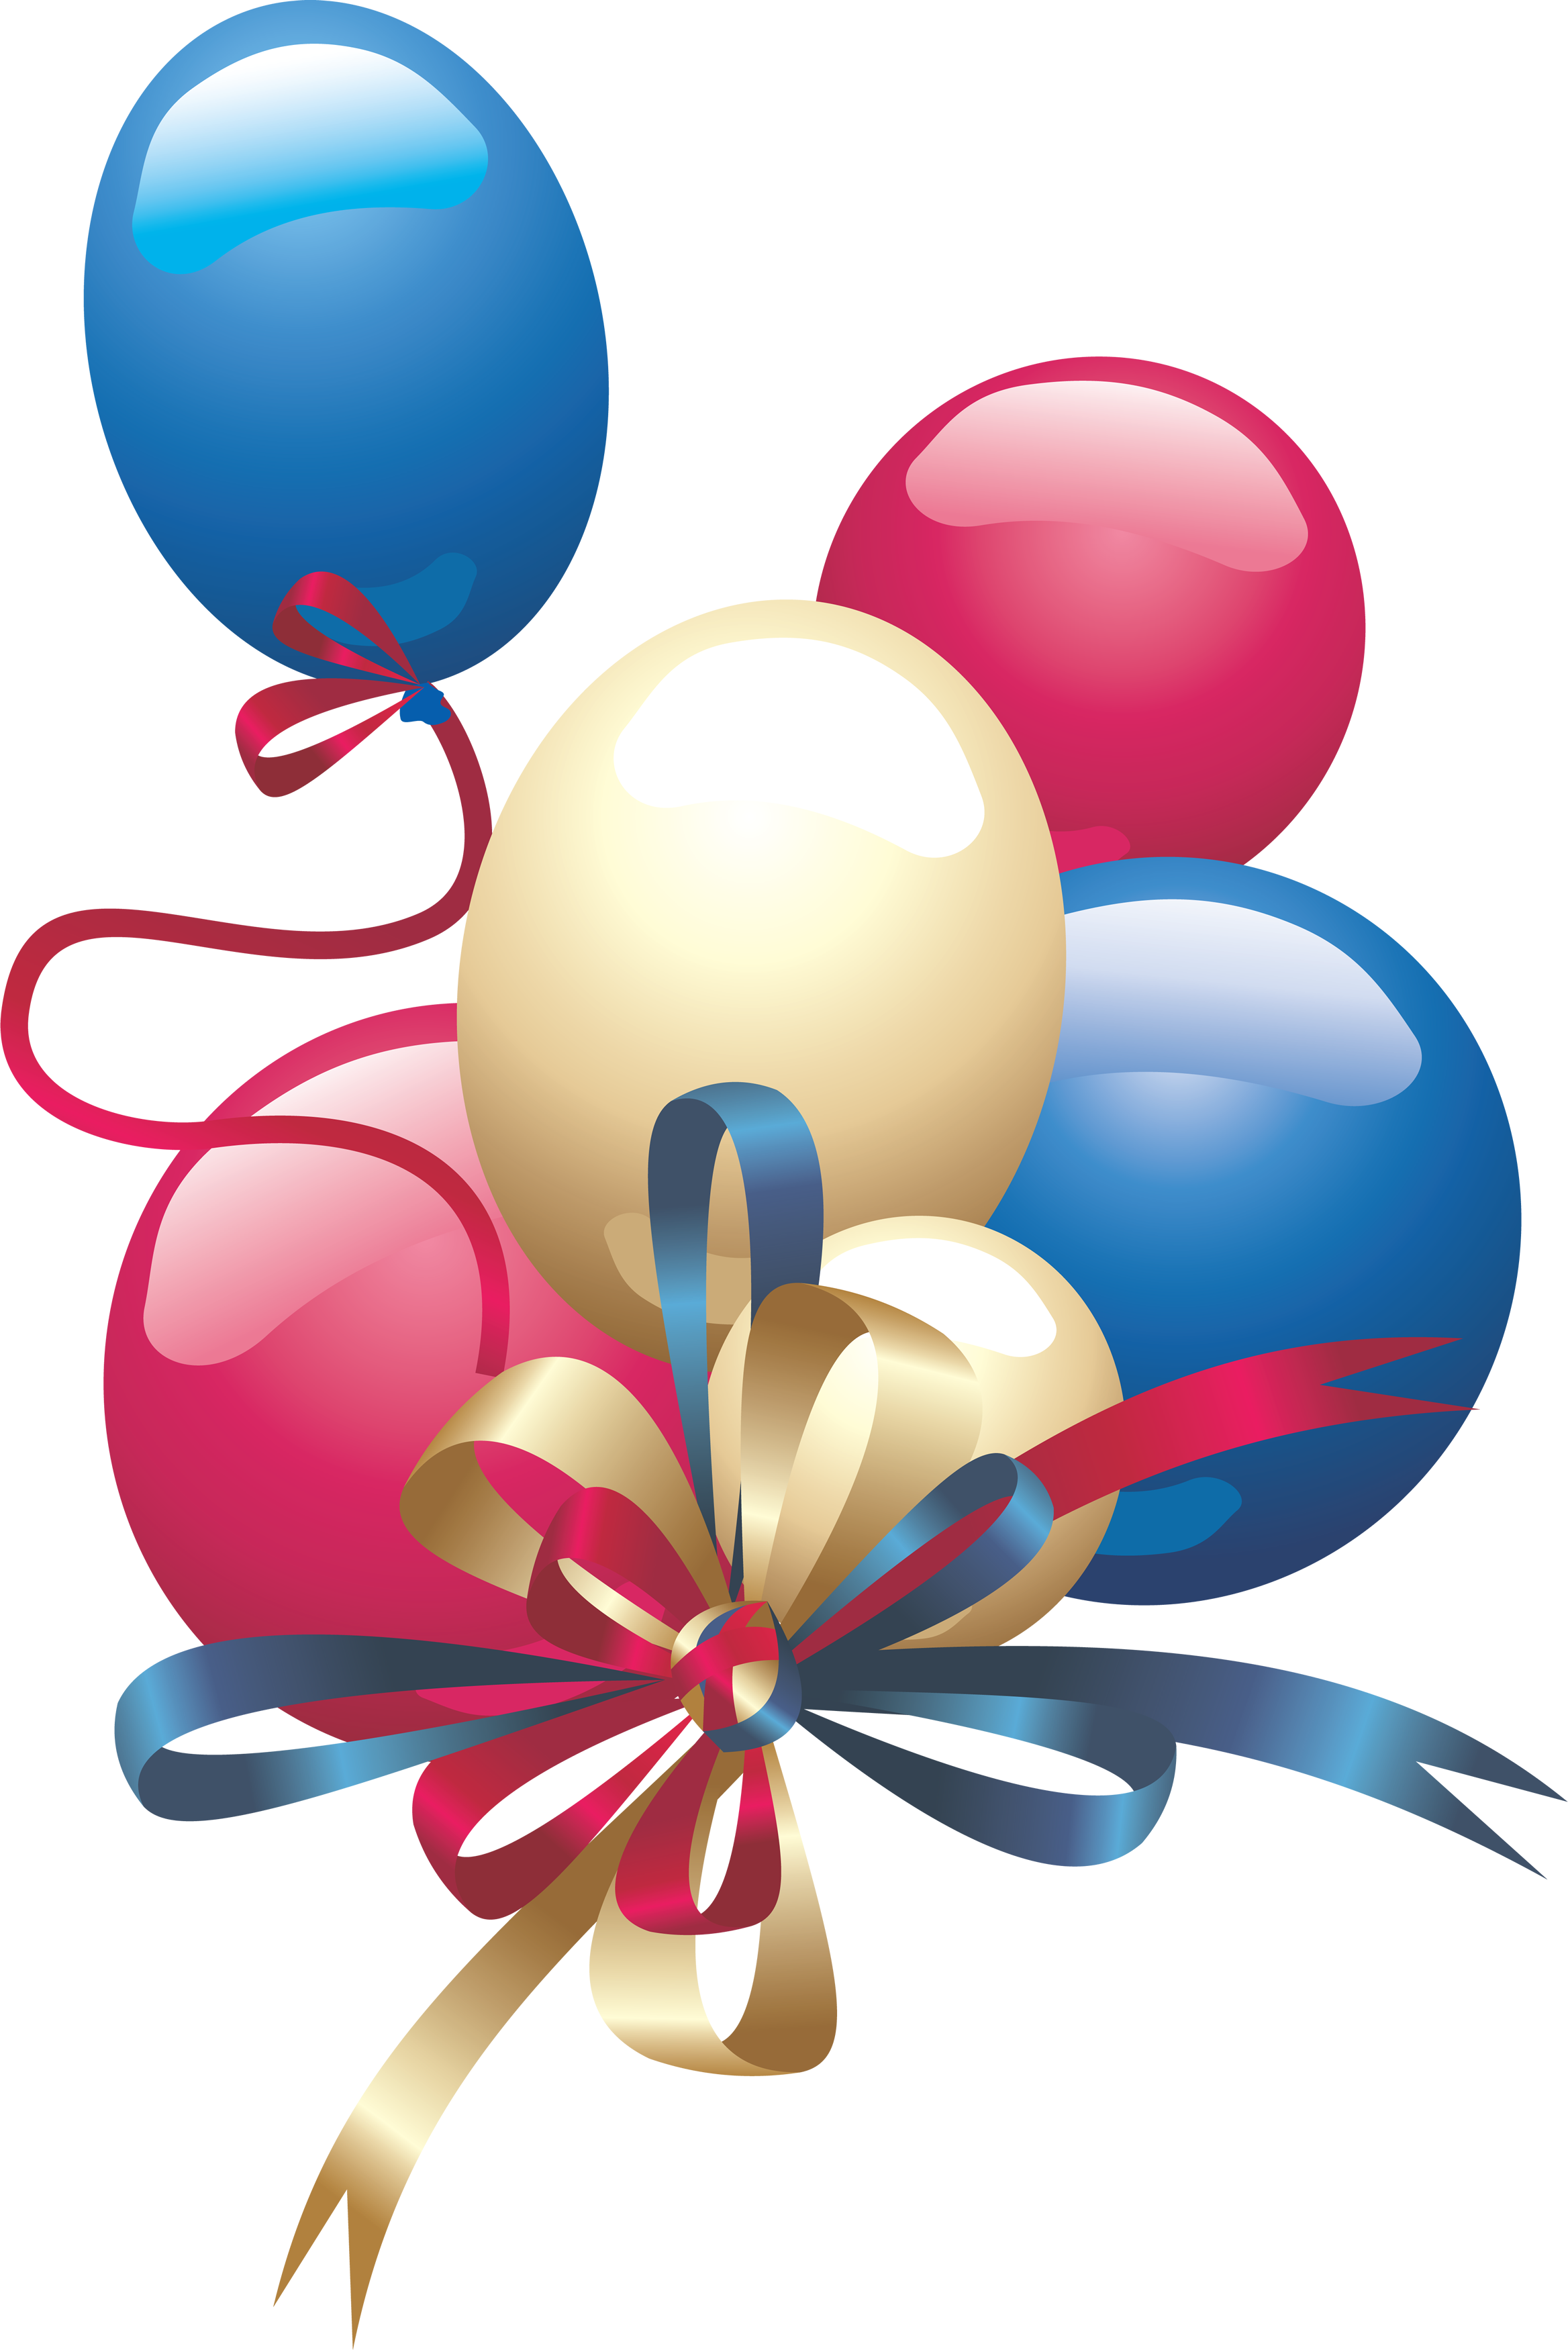 Balloon Png Image - Png Balloons Pink And Blue - HD Wallpaper 